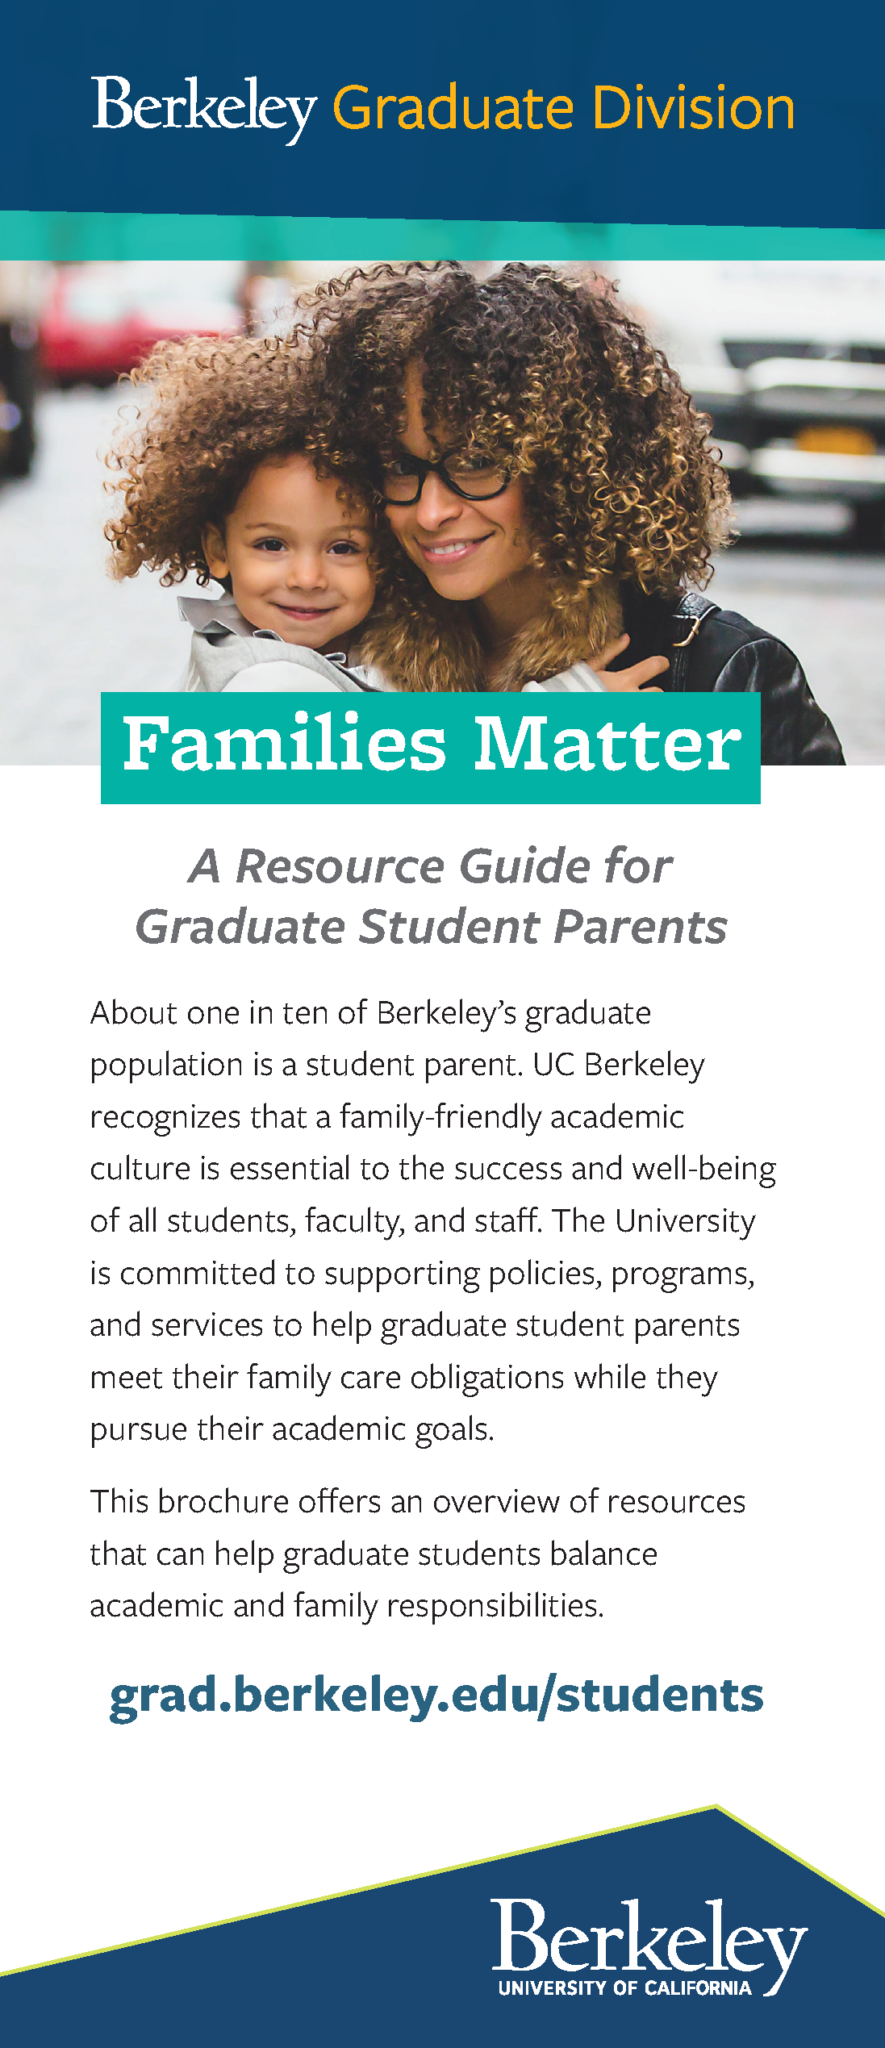 image of front of Families Matter brochure, with Berkeley Graduate Division logo and photo of parent and child smiling